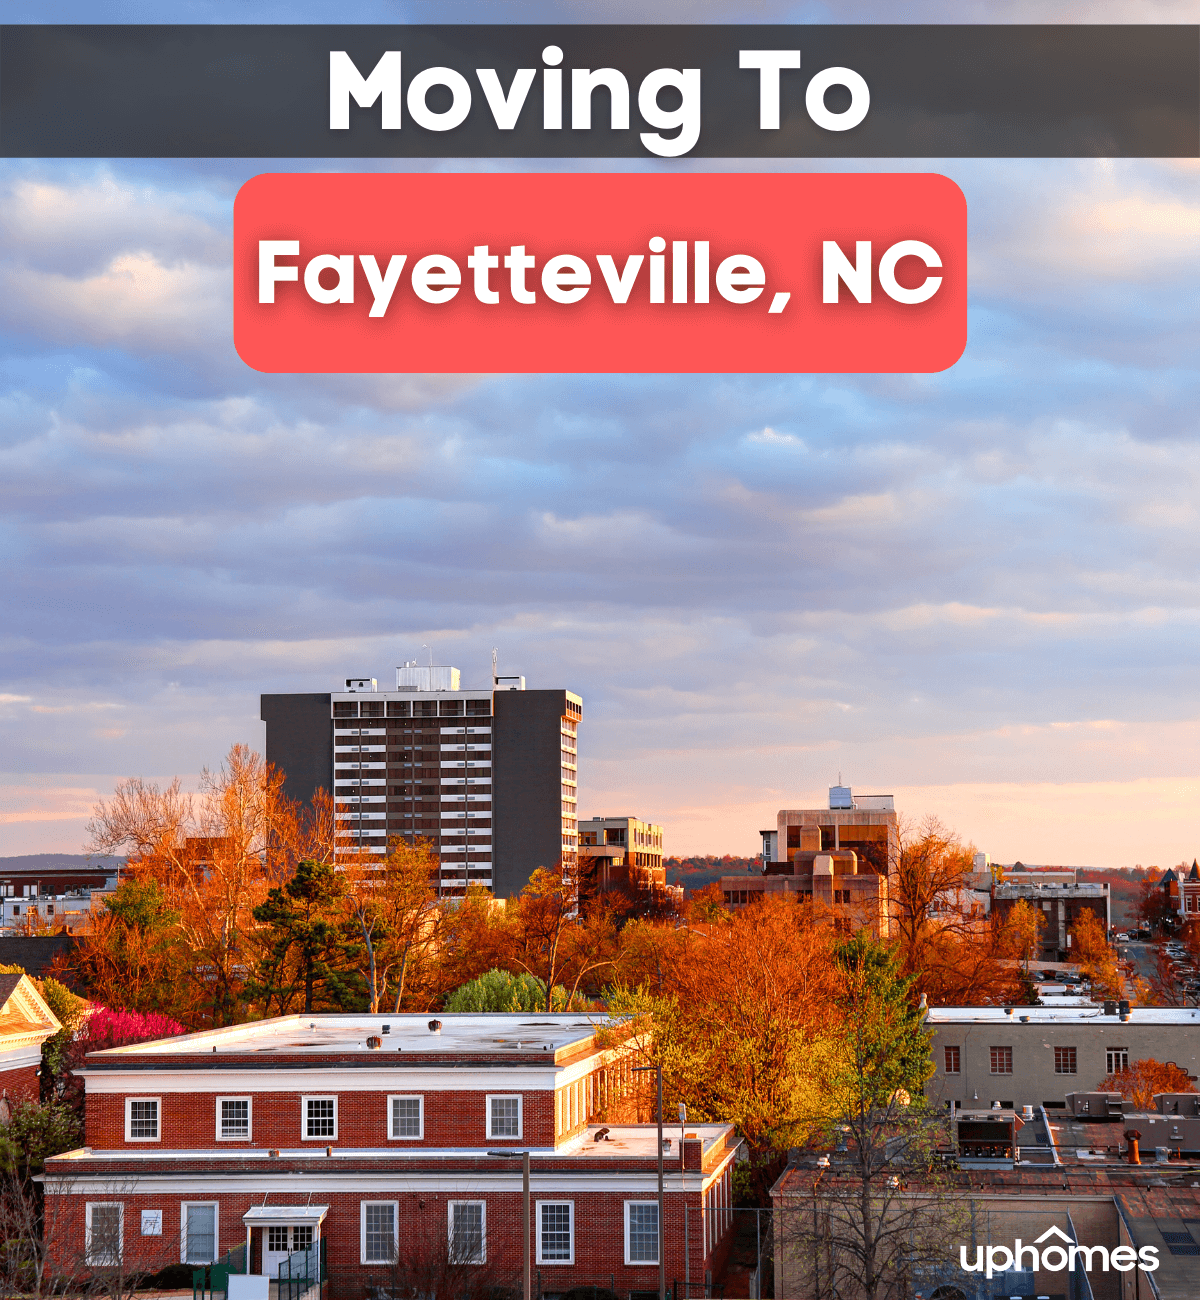 Living in Fayetteville, NC - Relocating to Fayetteville what is it like there?